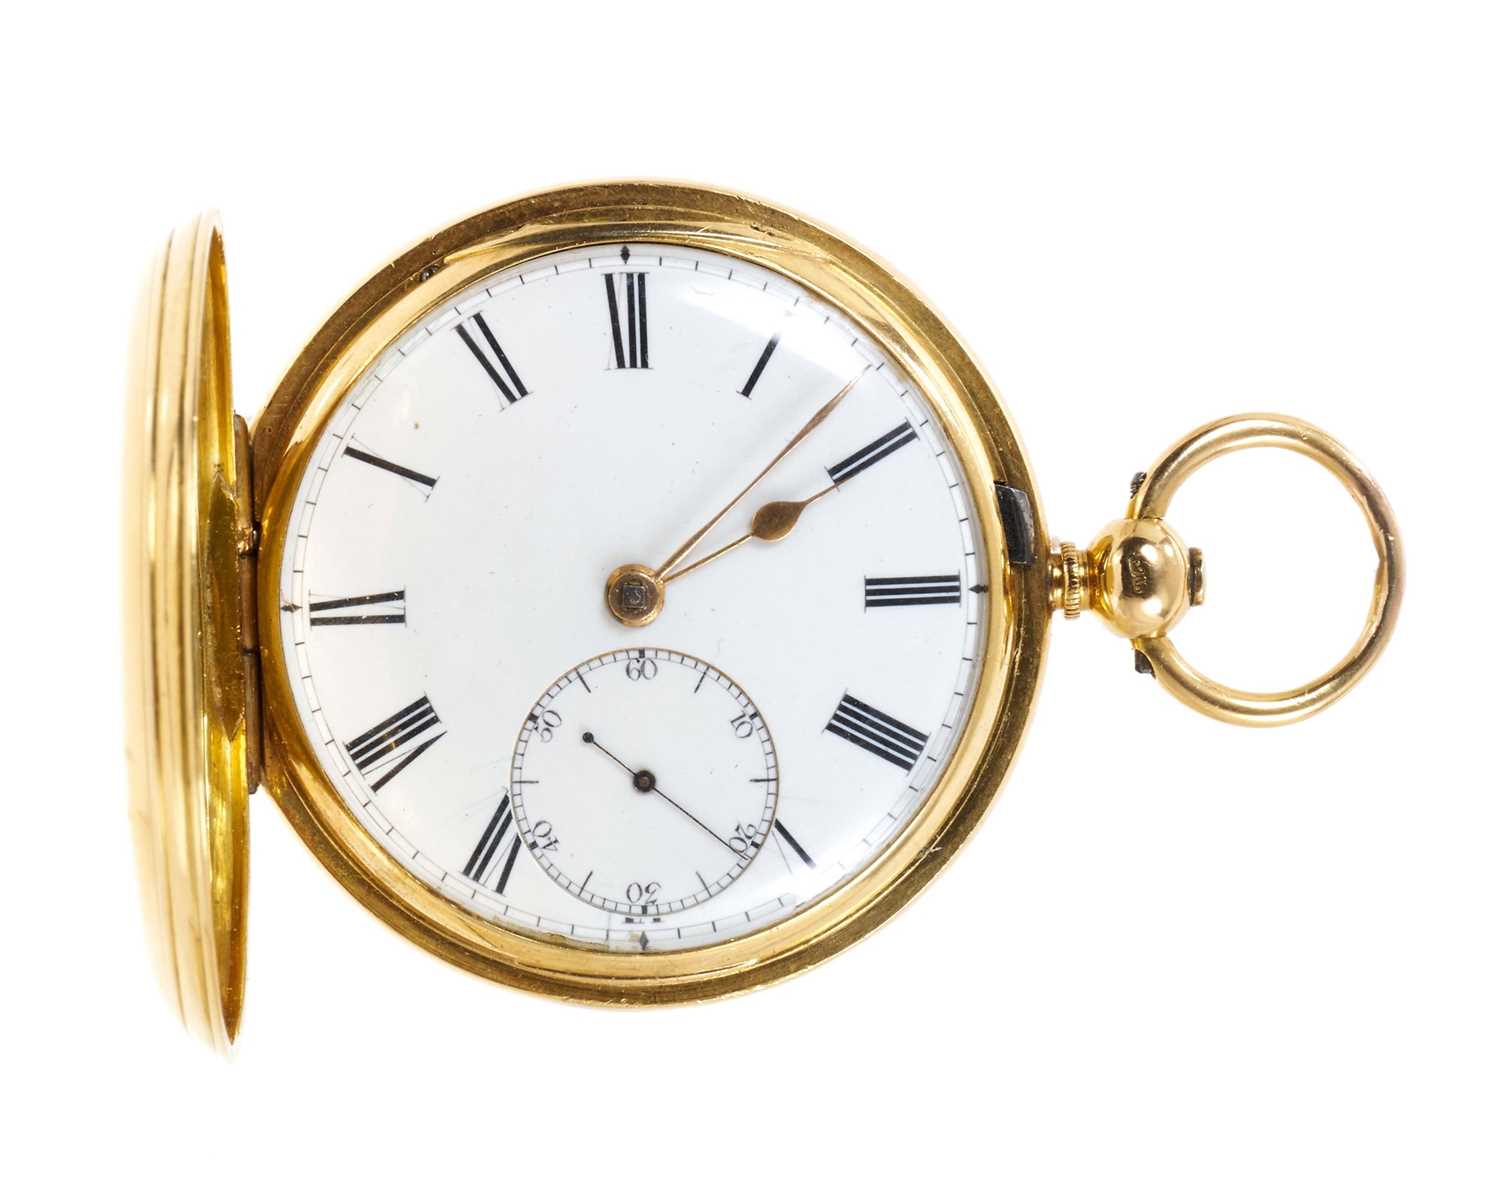 Victorian 18ct gold hunter pocket watch by Moyle, Chichester